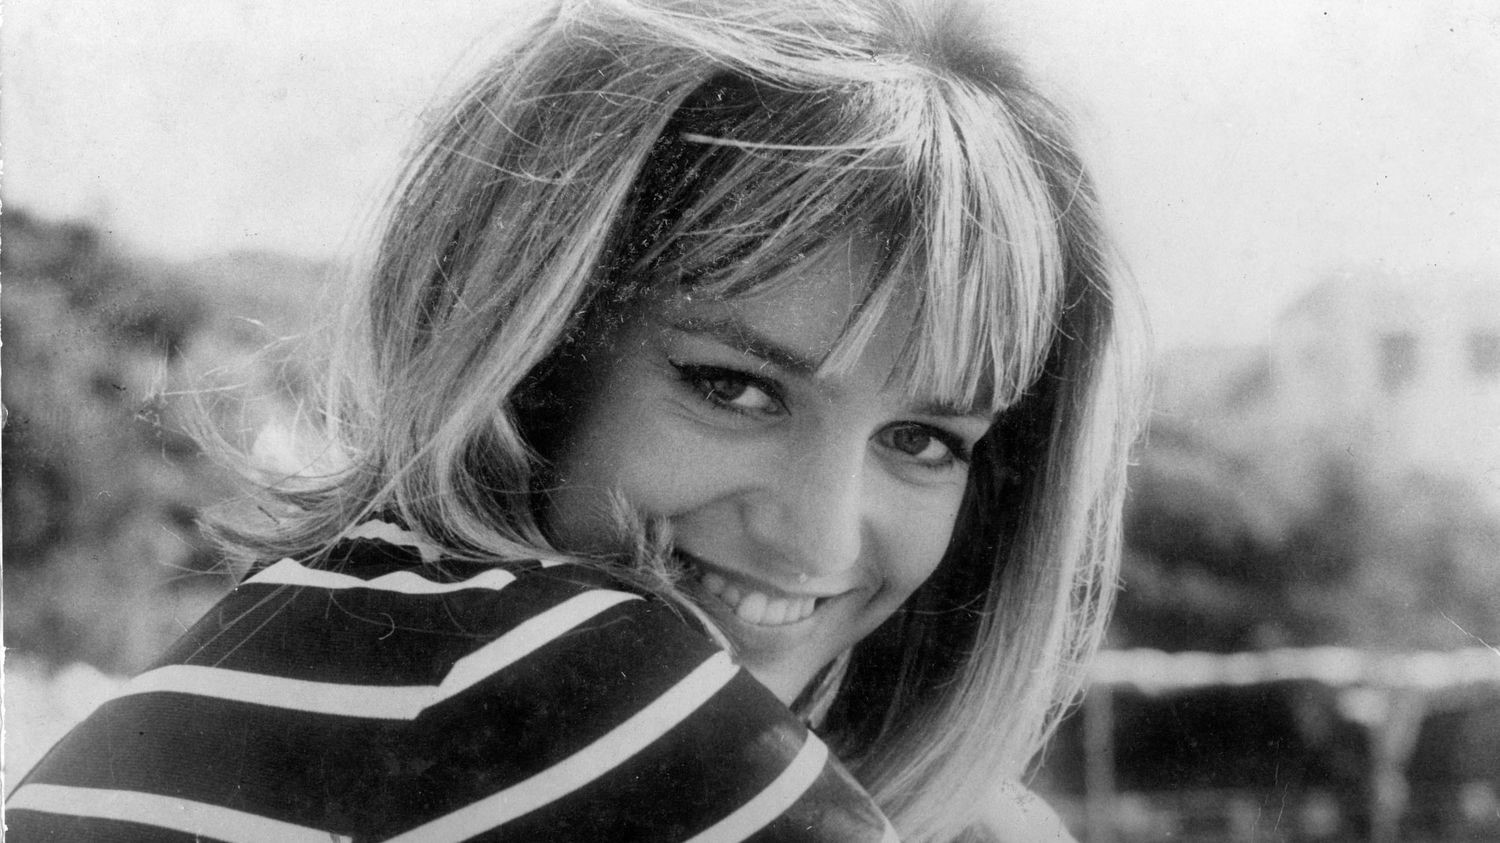 Catherine-Spaak, muse of the Italian post-war.